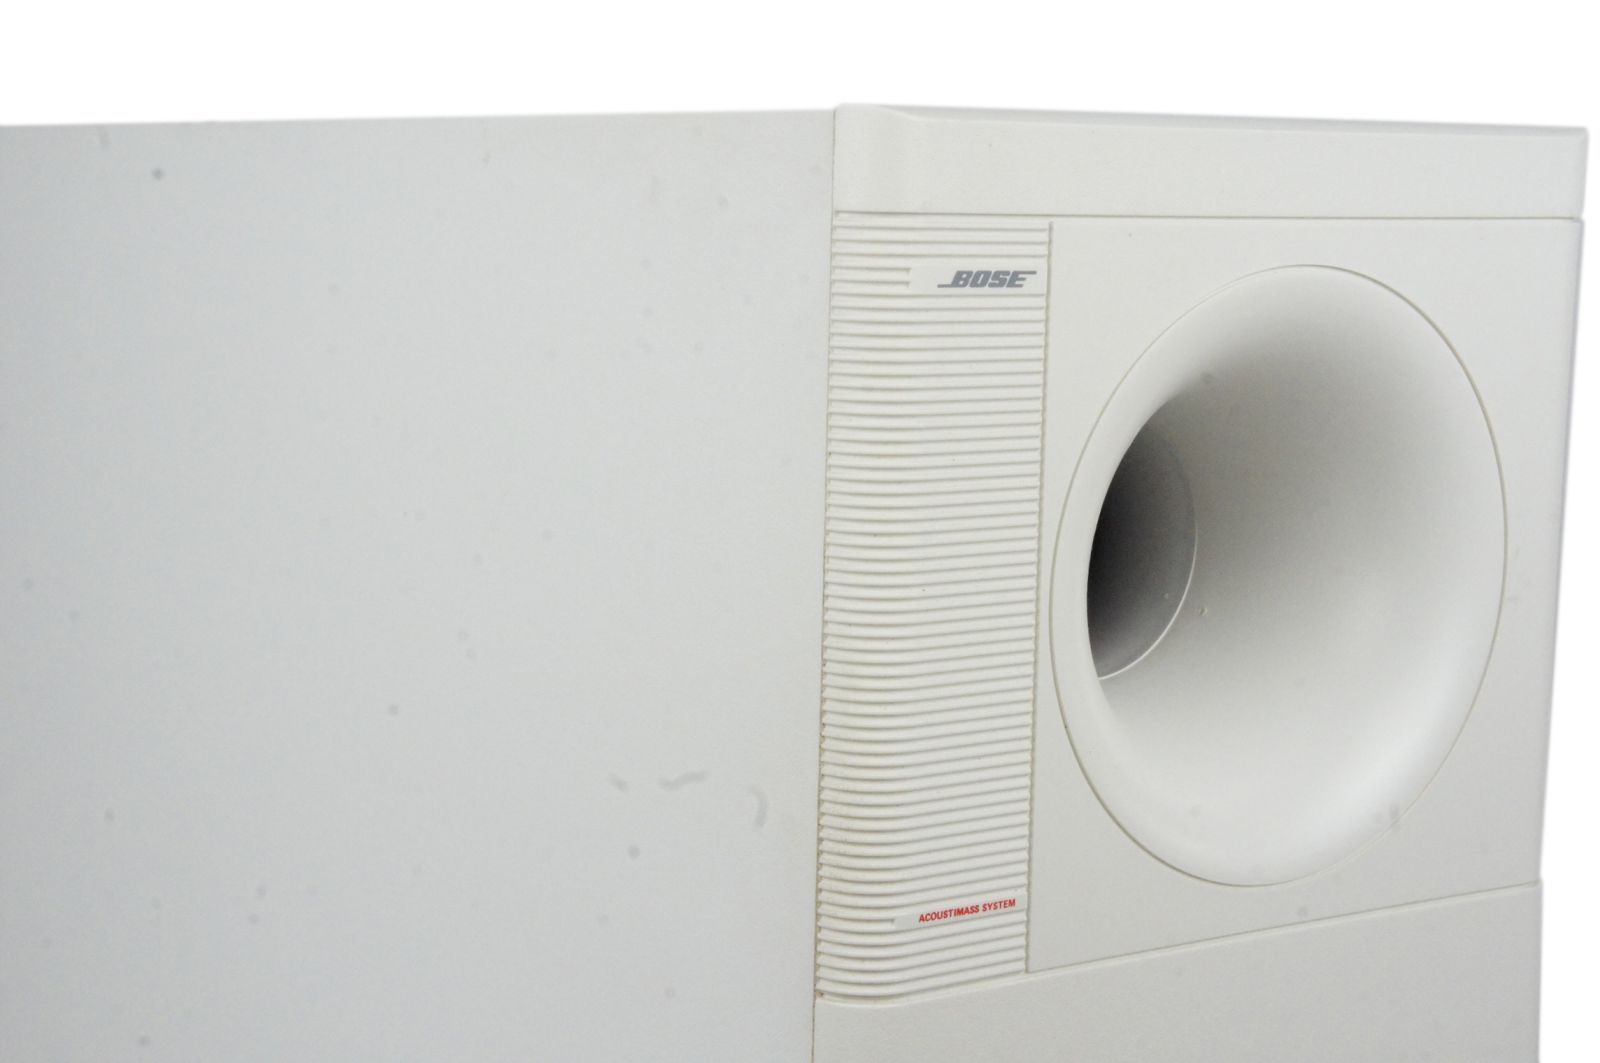 Bose_Acoustimass_10_5.1_Subwoofer_Weiss_inkl_03